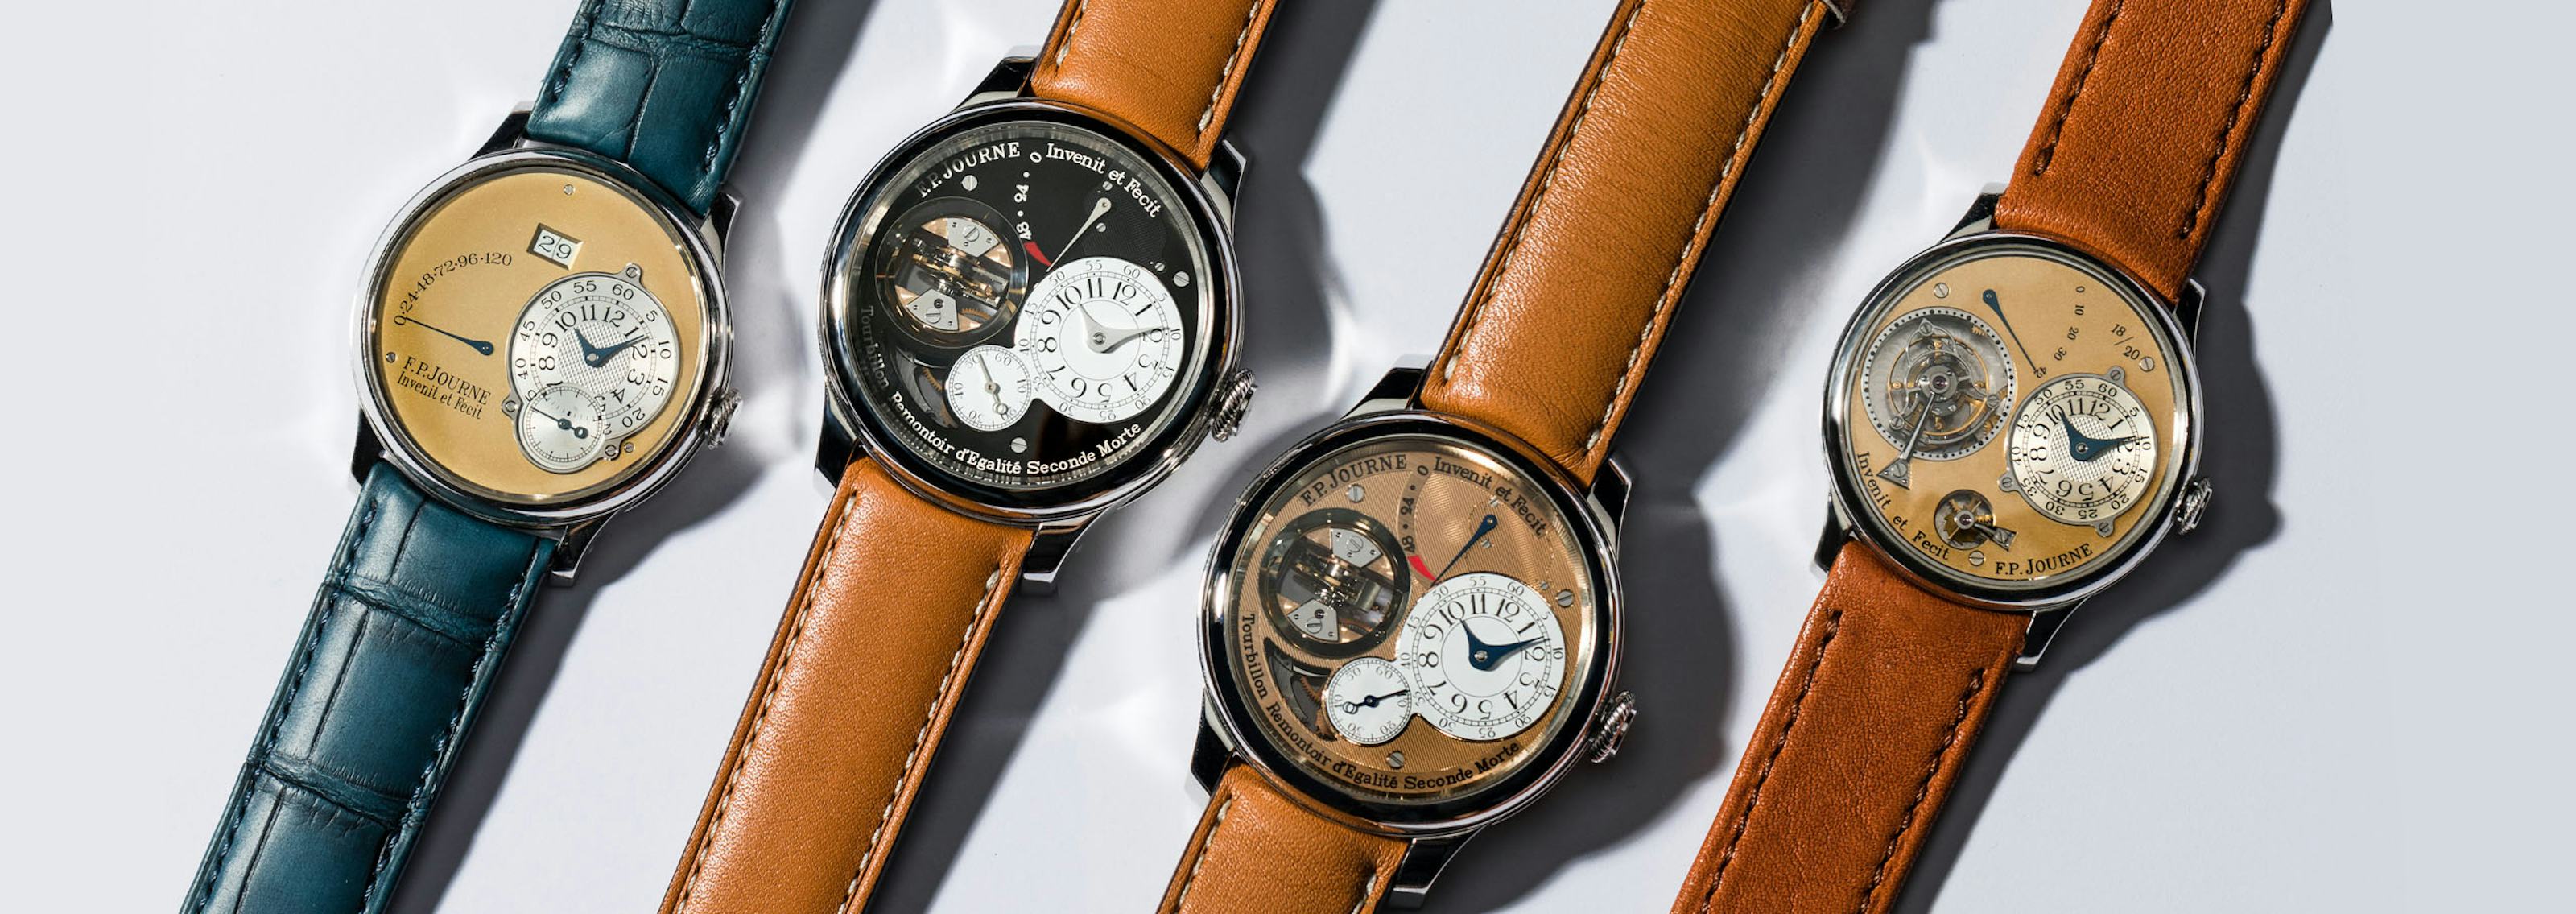 F.P. Journe Review: A Brand Worth Examining